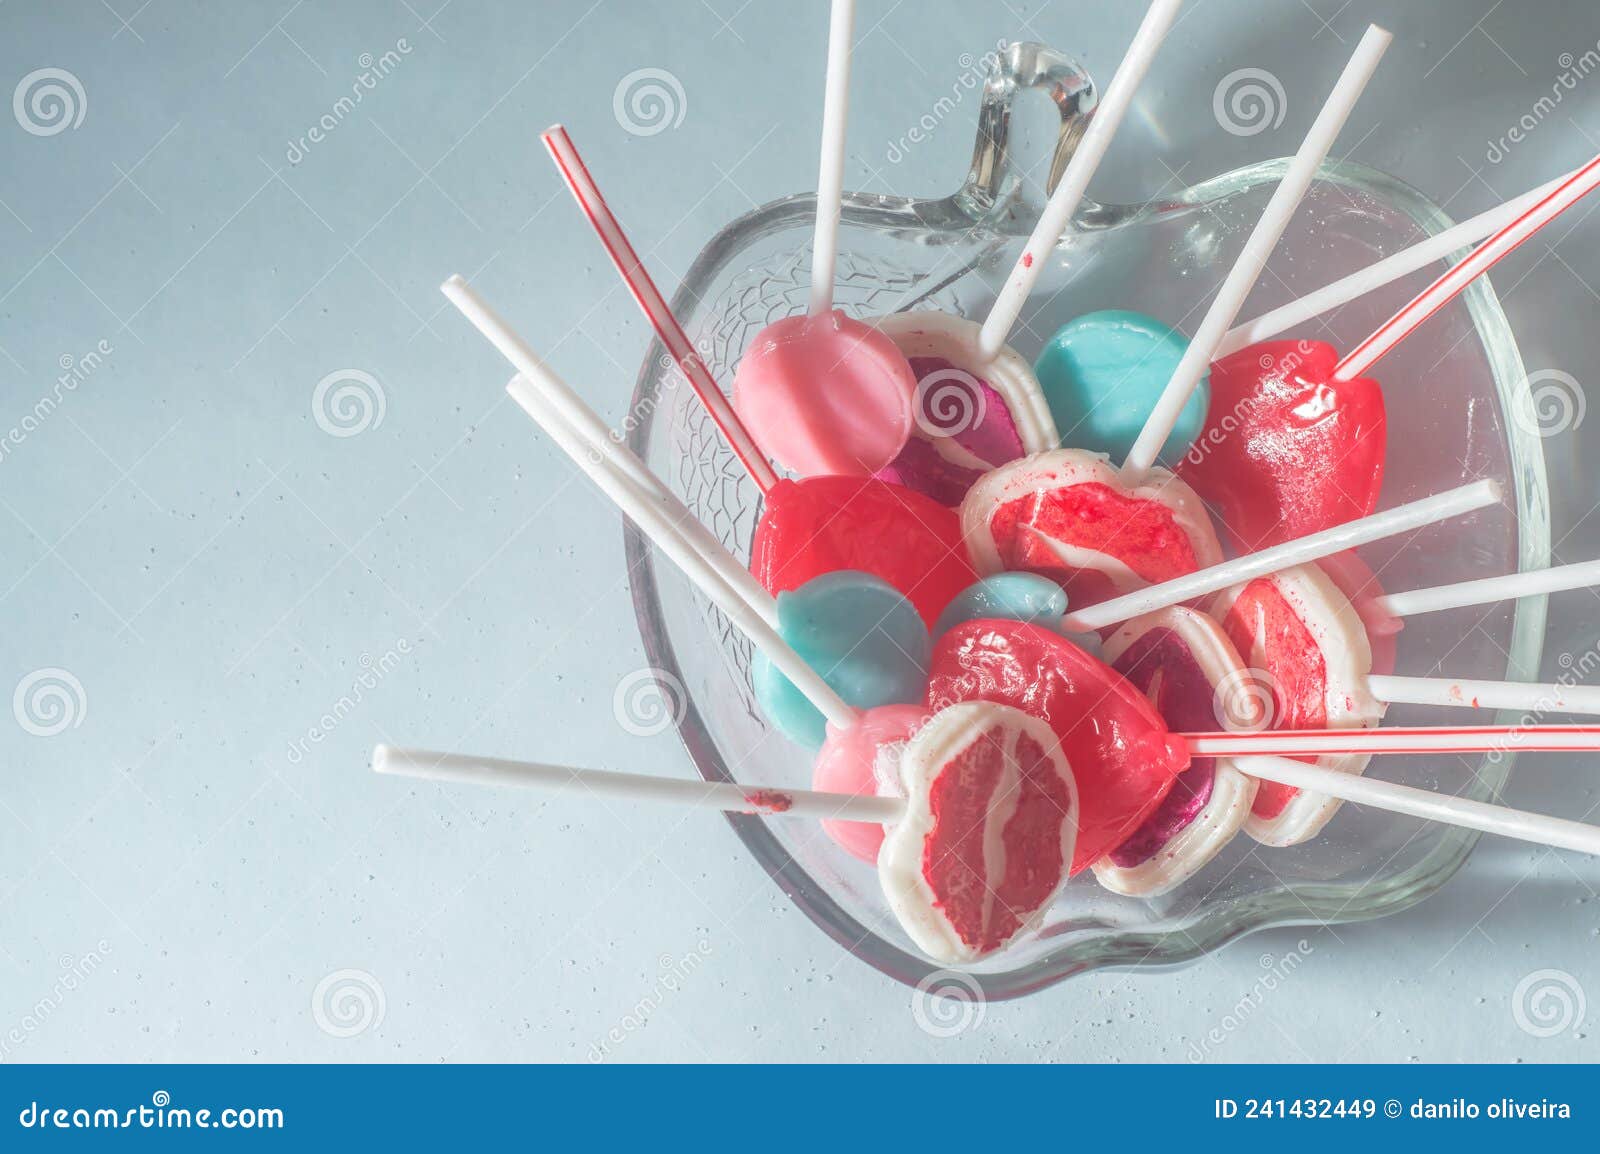 various lollipops in a transparente bowl with light blue background